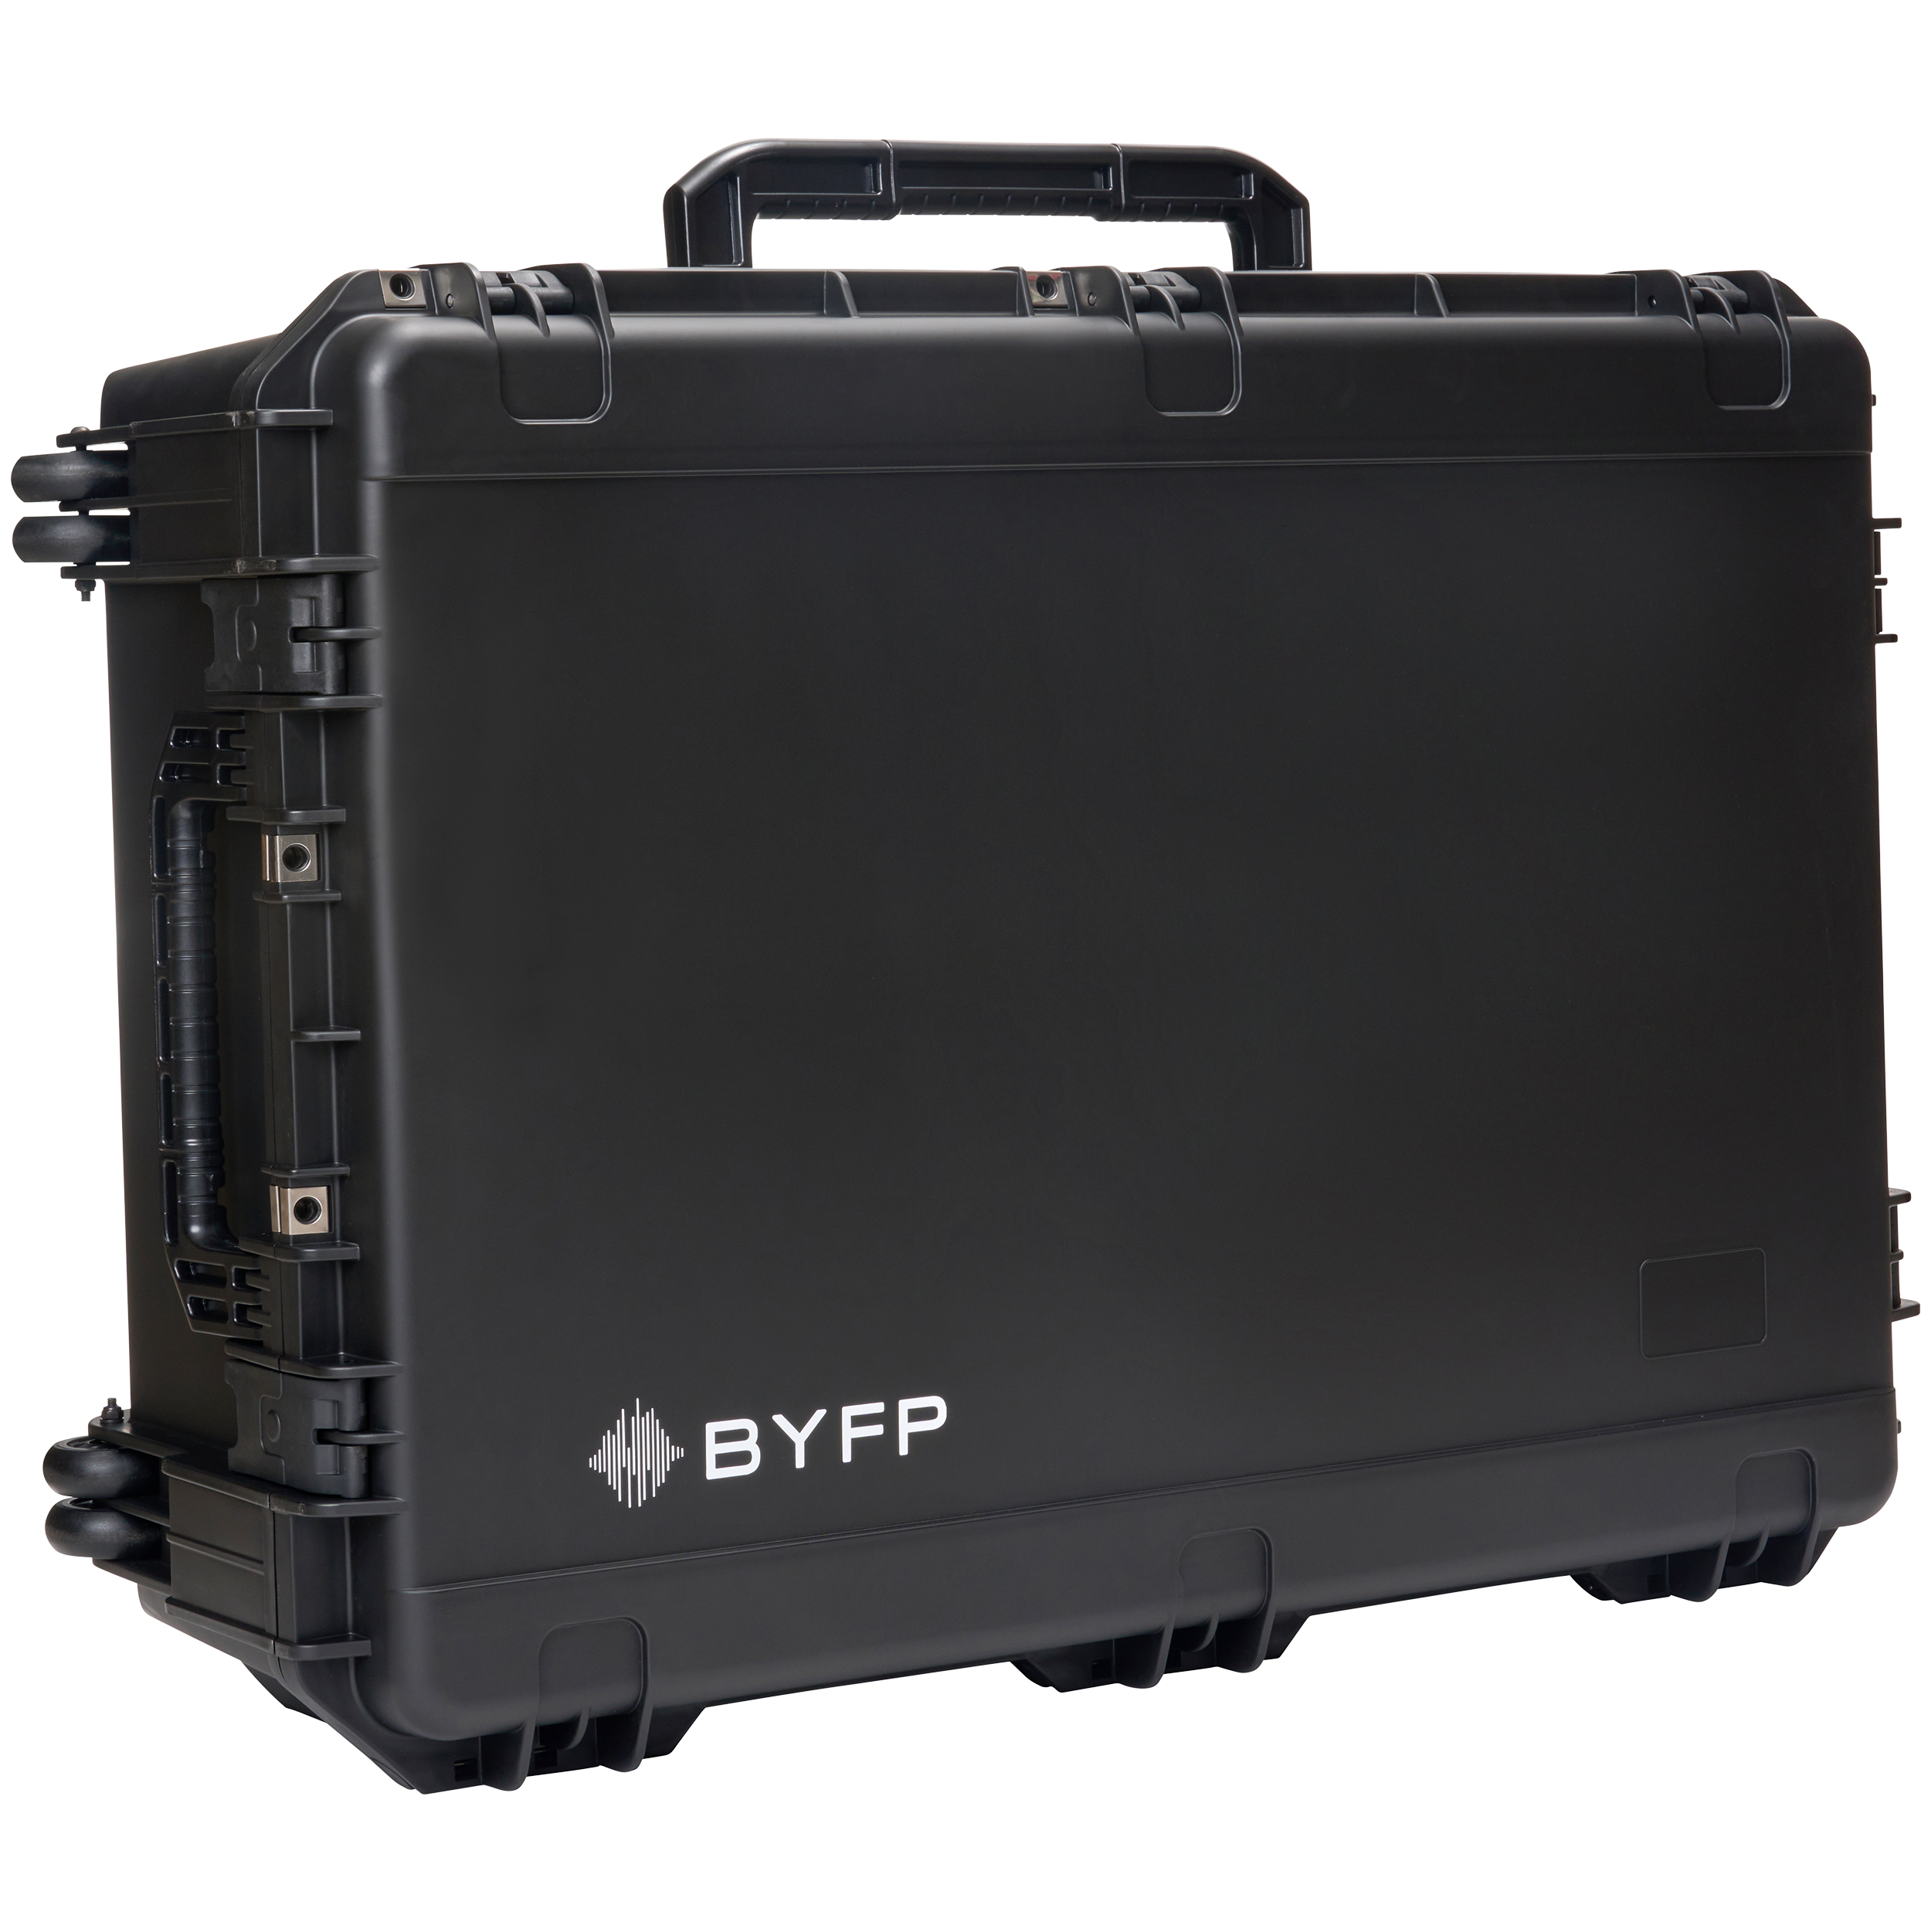 BYFP ipCase for 2x RCF TT515